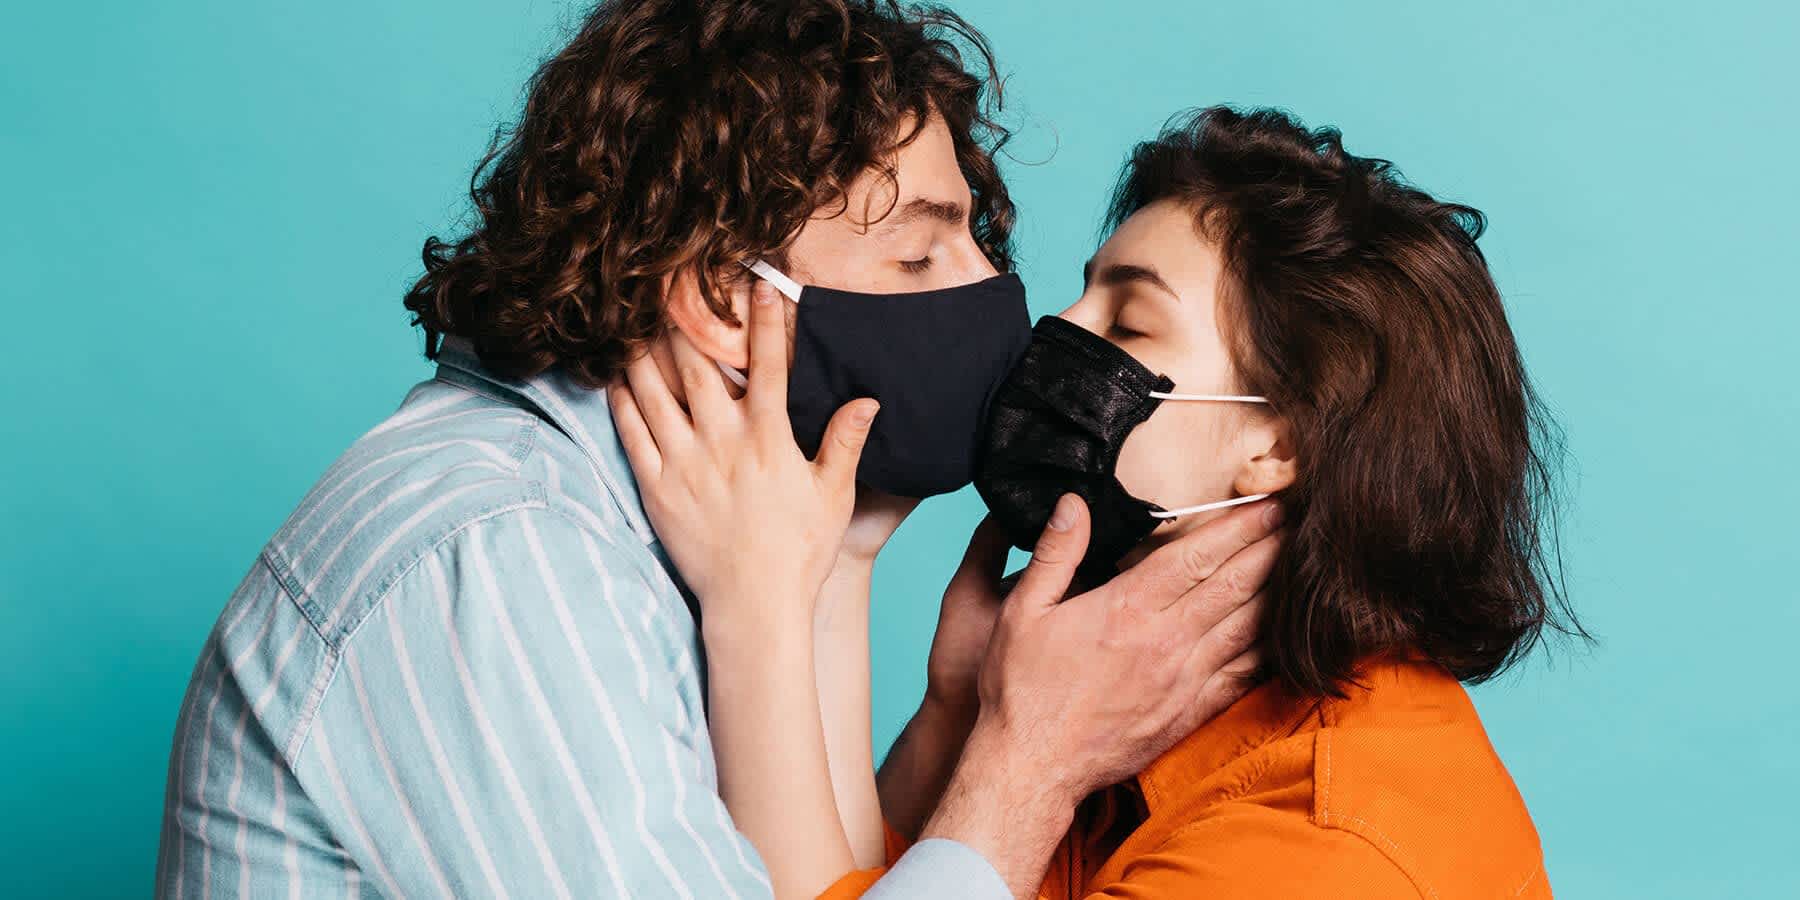 Couple wearing masks kissing during COVID-19 pandemic